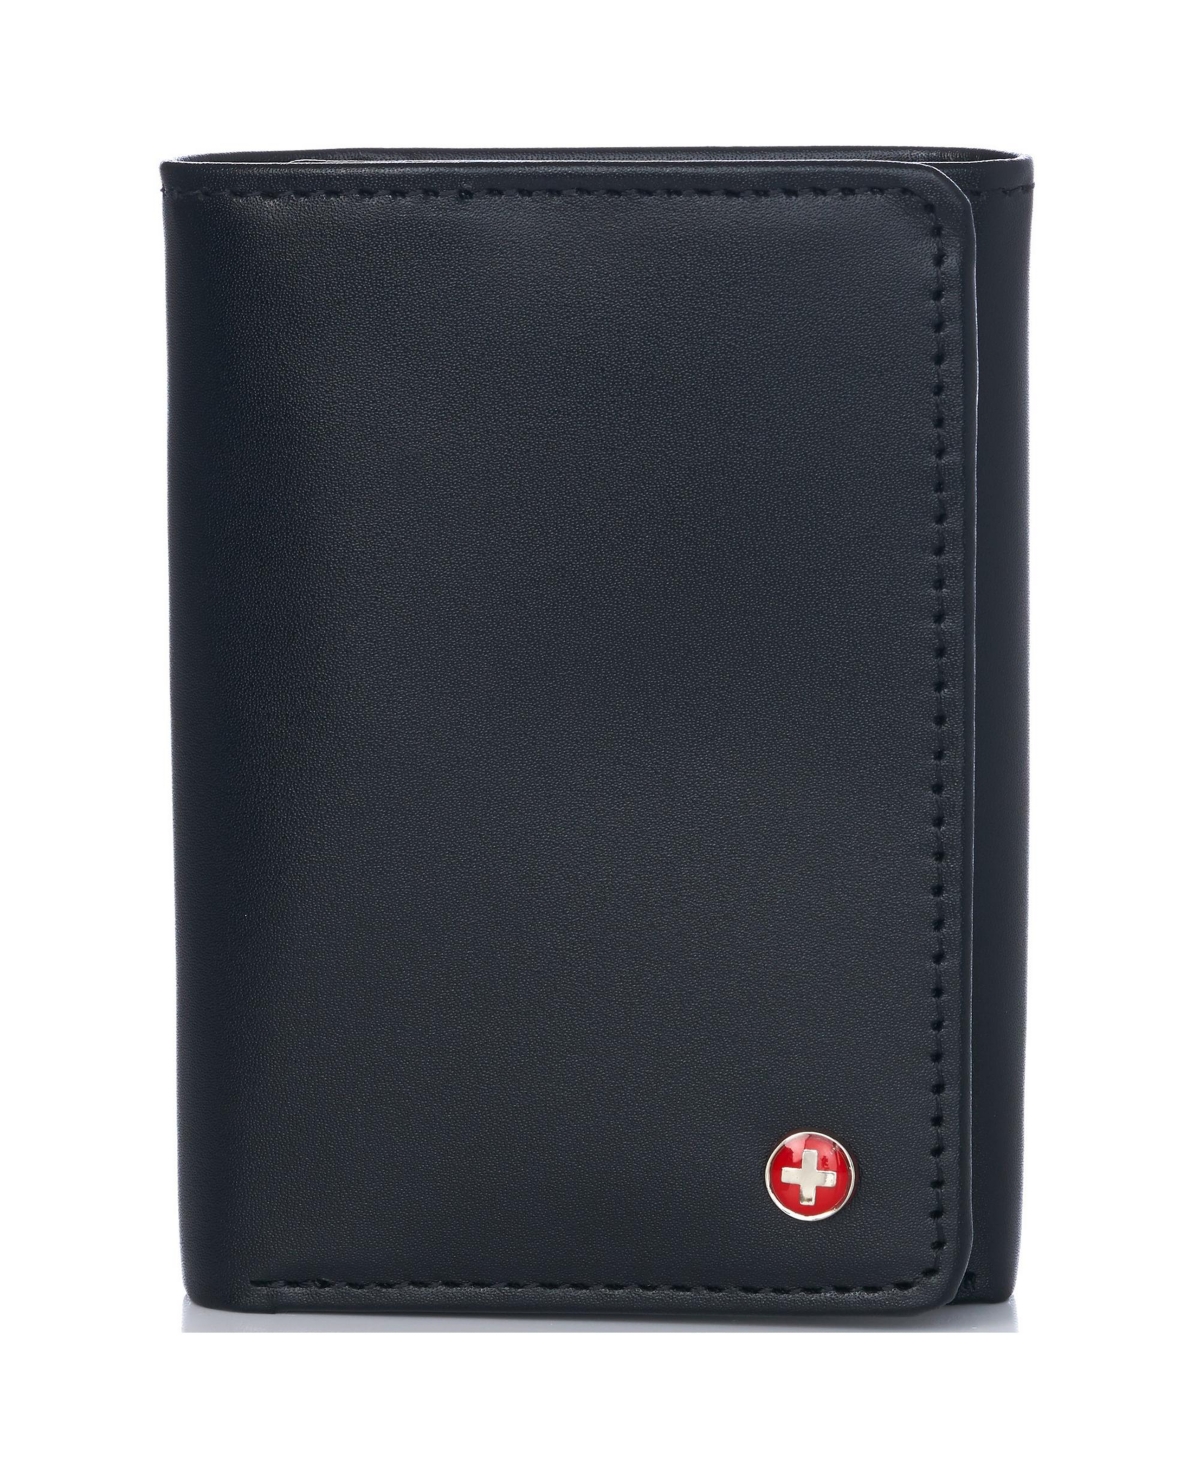 Rfid Mens Wallet Deluxe Capacity Trifold With Divided Bill Section - Soft nappa black